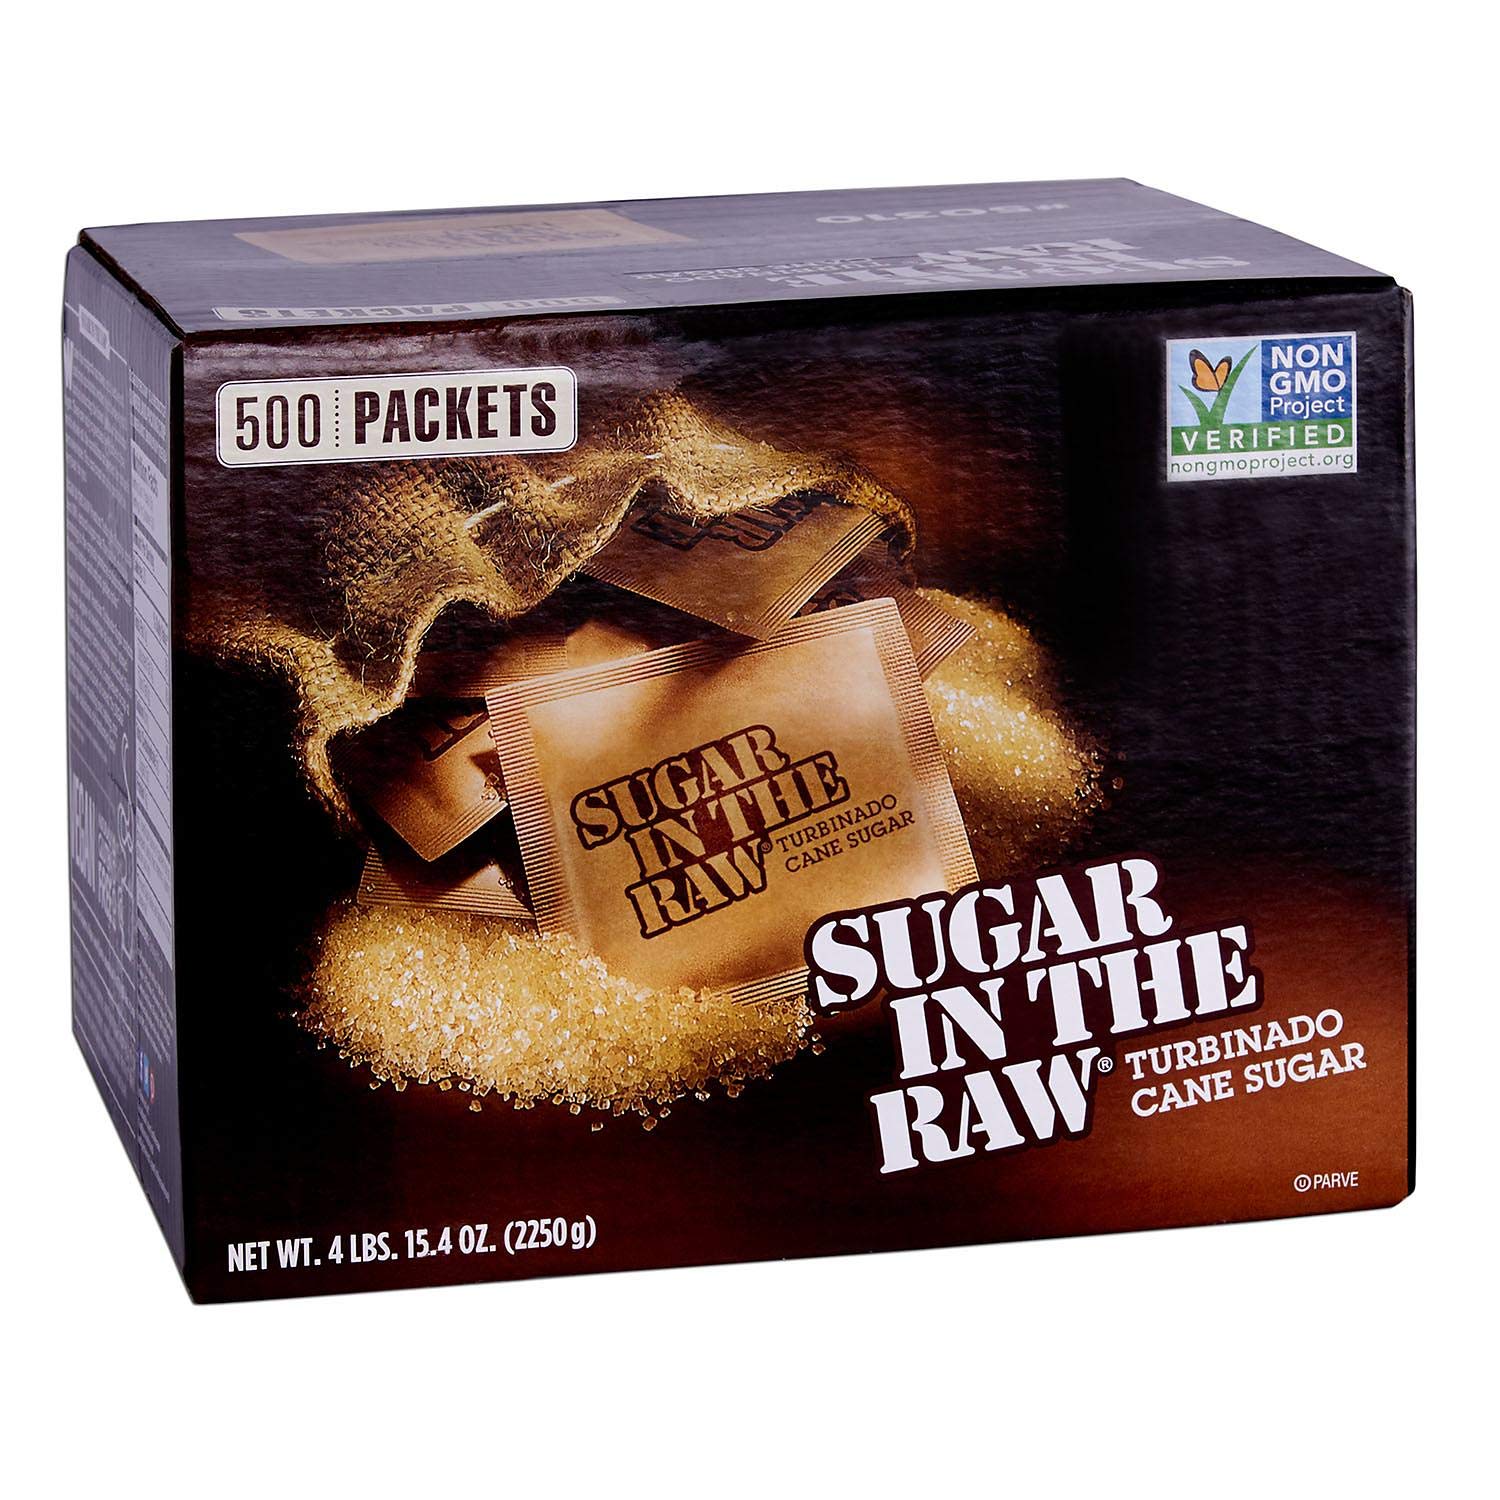 Sugar In The Raw, 500 Packets 4 LBS,15.4 Ounces